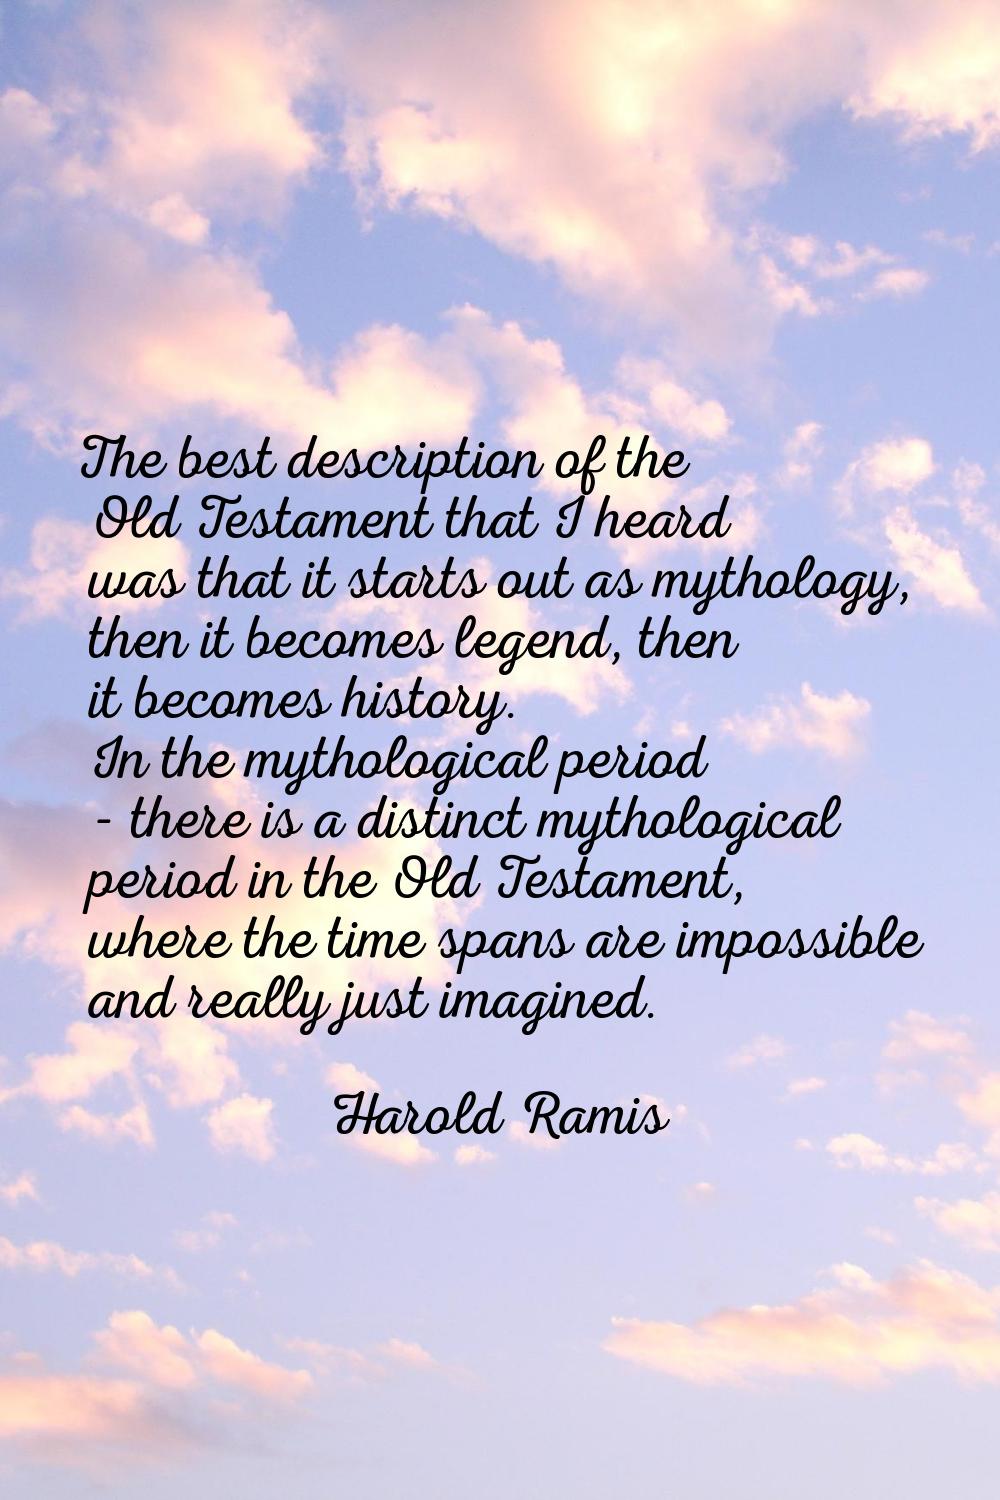 The best description of the Old Testament that I heard was that it starts out as mythology, then it